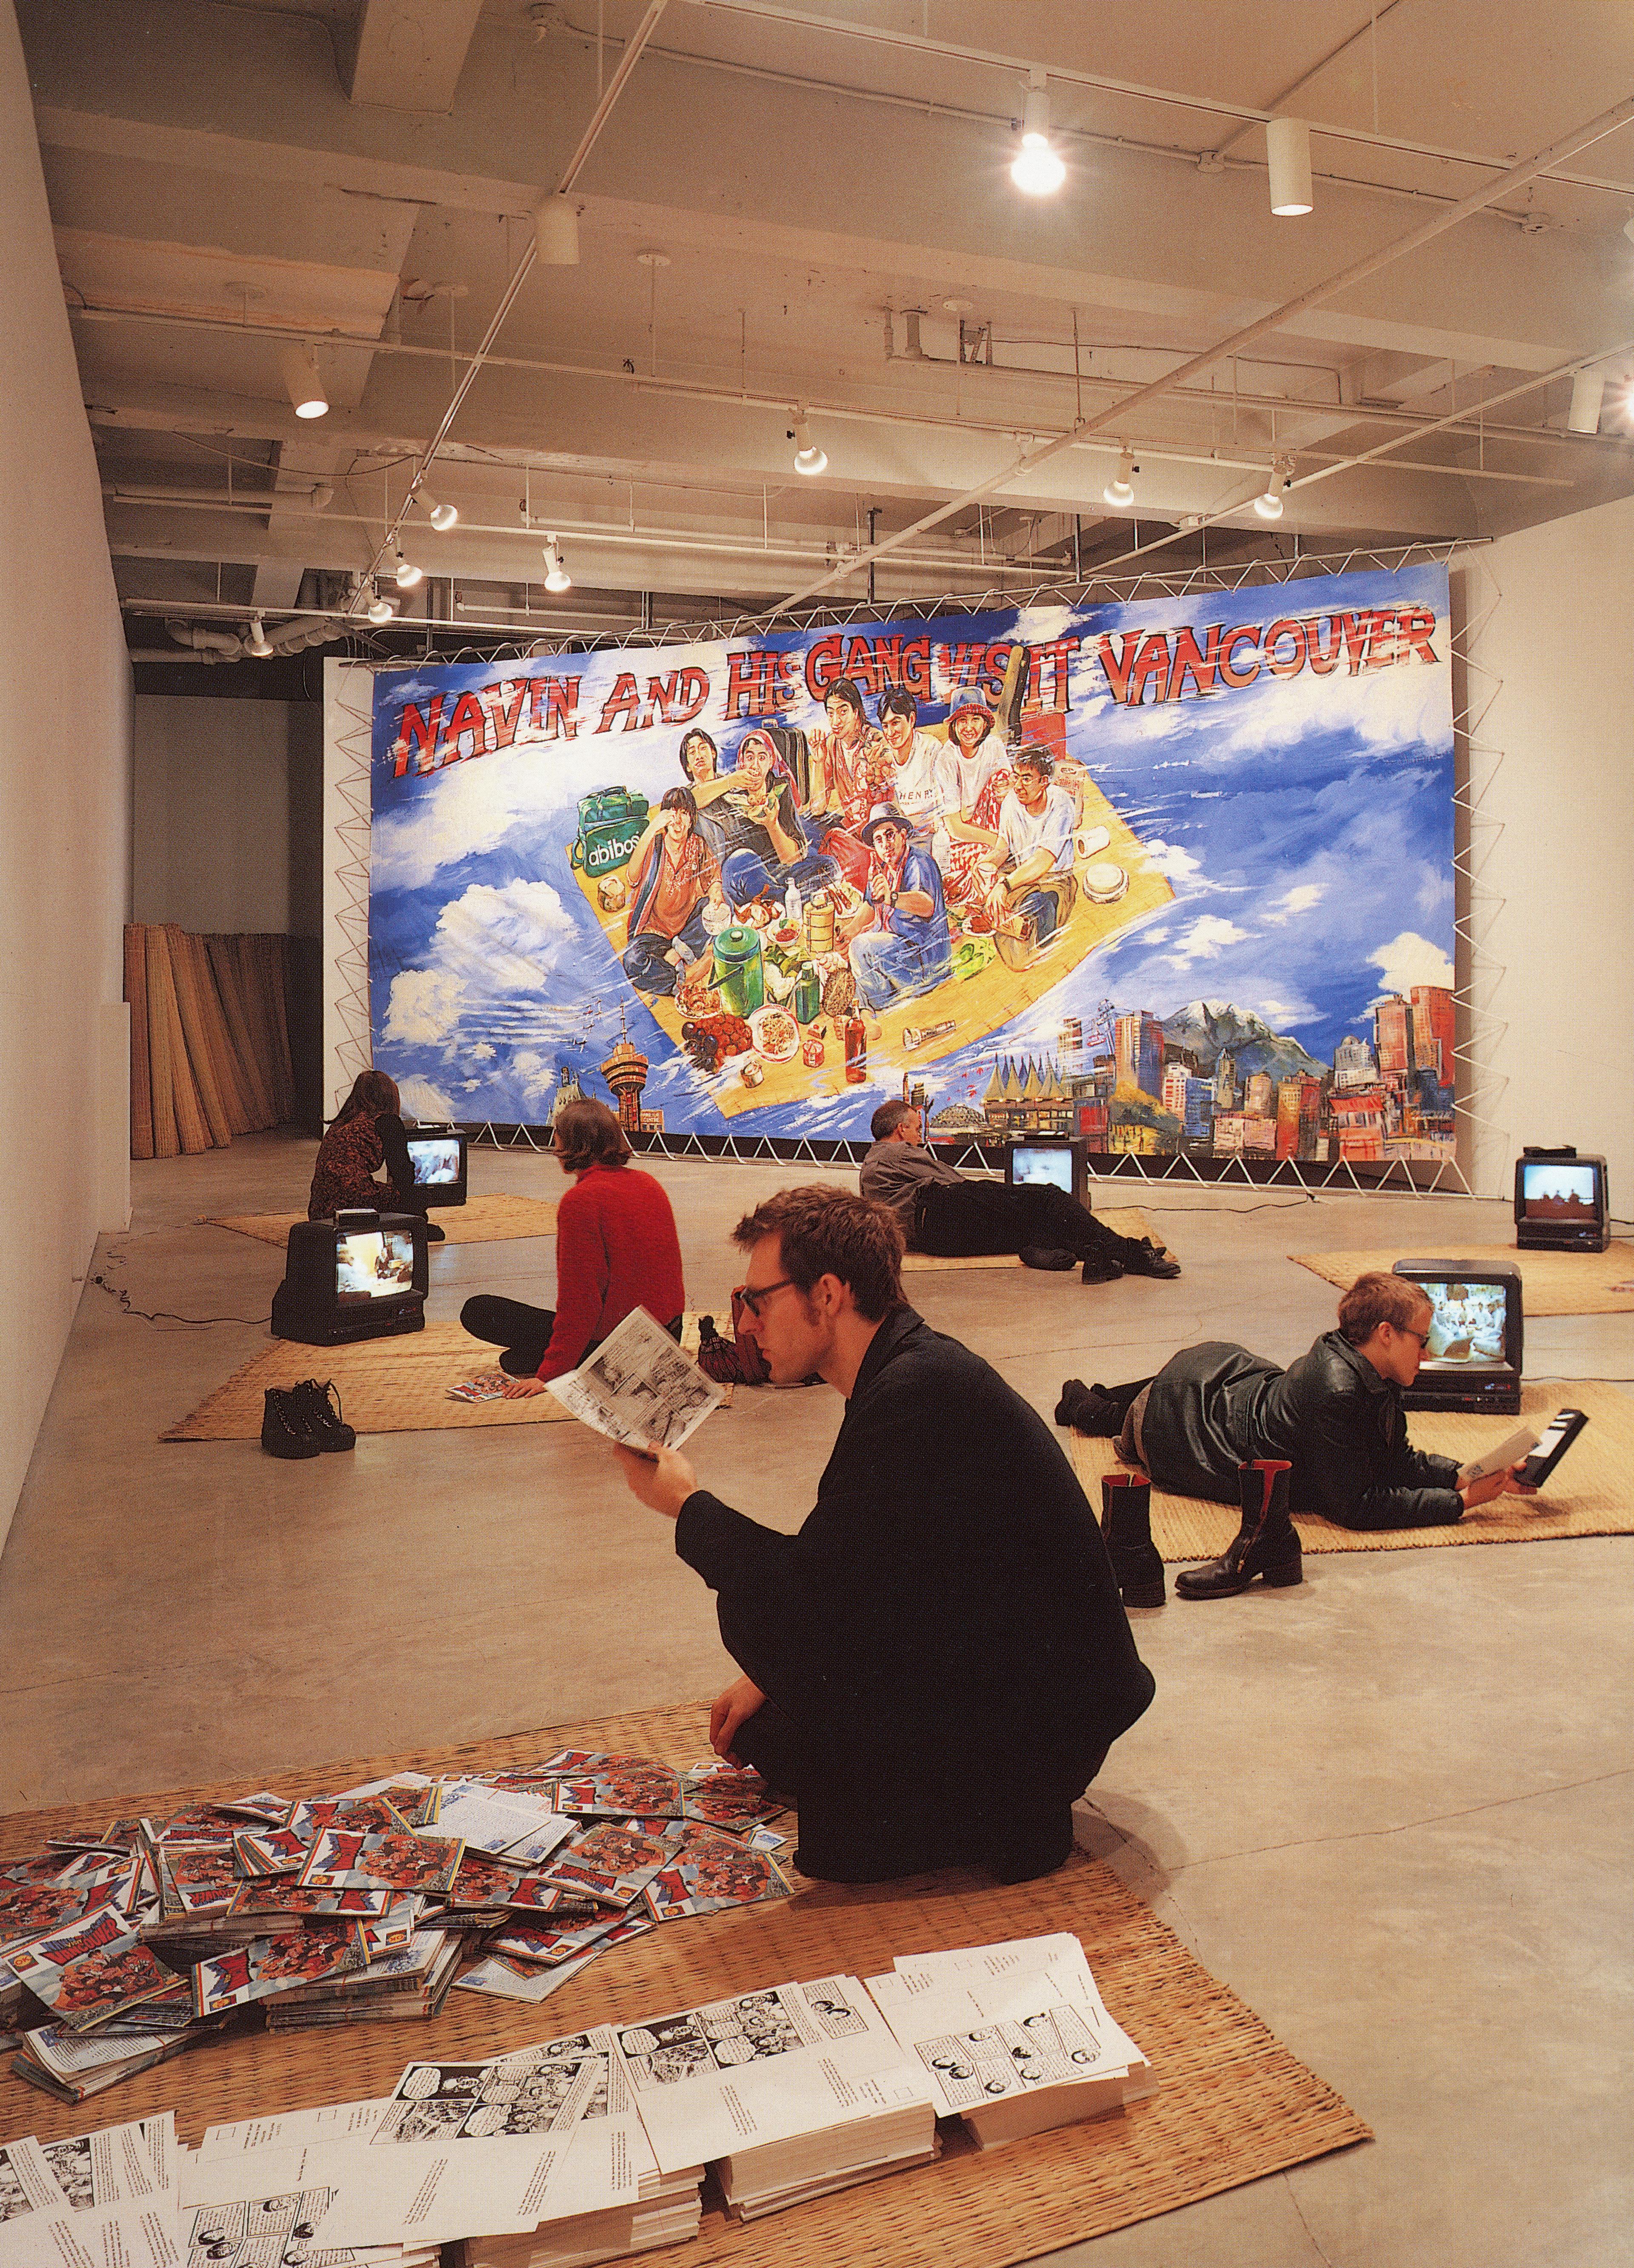 Several rush mats and CRT TVs are placed on the floor of a gallery space. Some visitors sit on the mats and watch videos. A large artist-made poster is mounted on the wall behind the installation. 